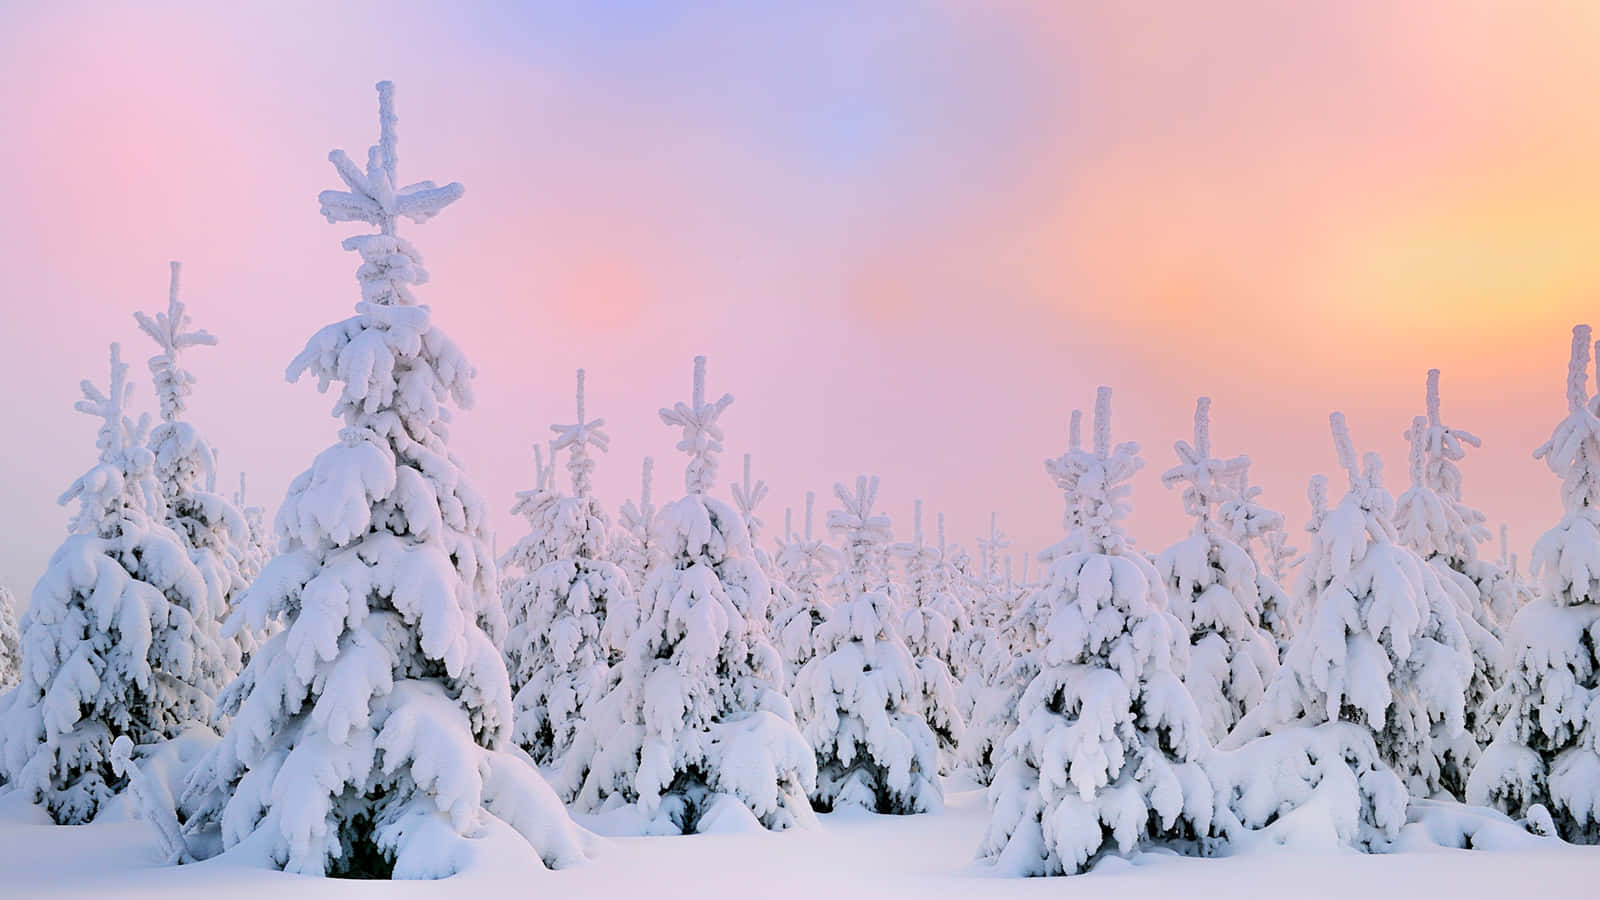 Enjoy the beauty of winter snow with this stunning desktop! Wallpaper